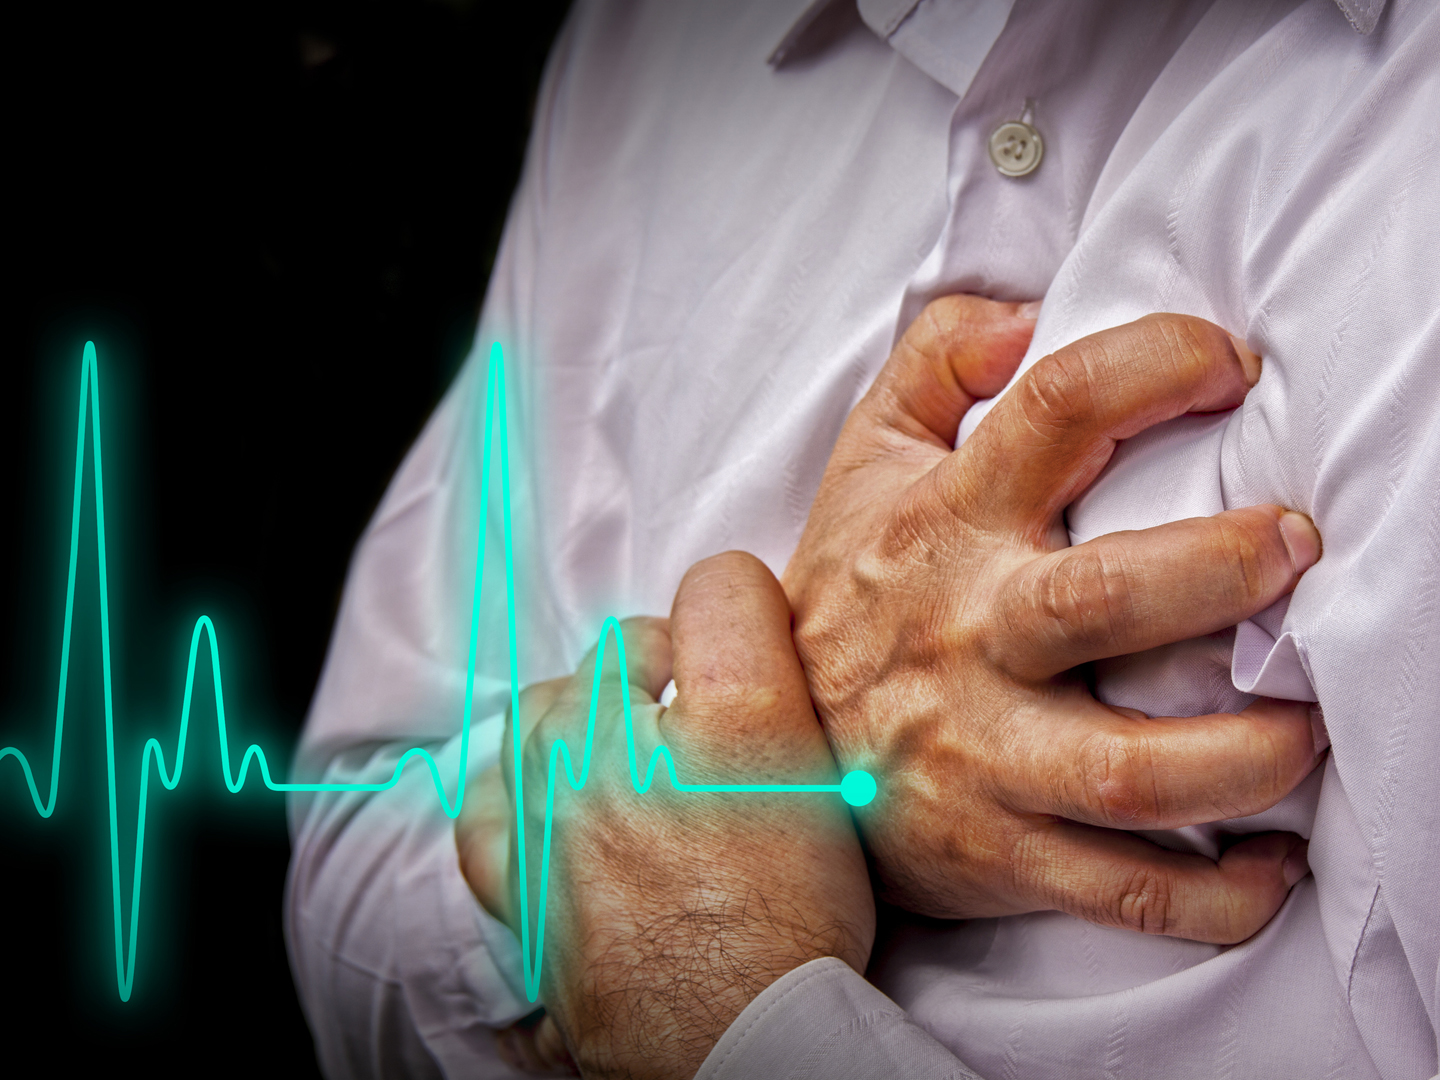 heart attack, myocardial infarction | heart health | andrew weil, m.d.